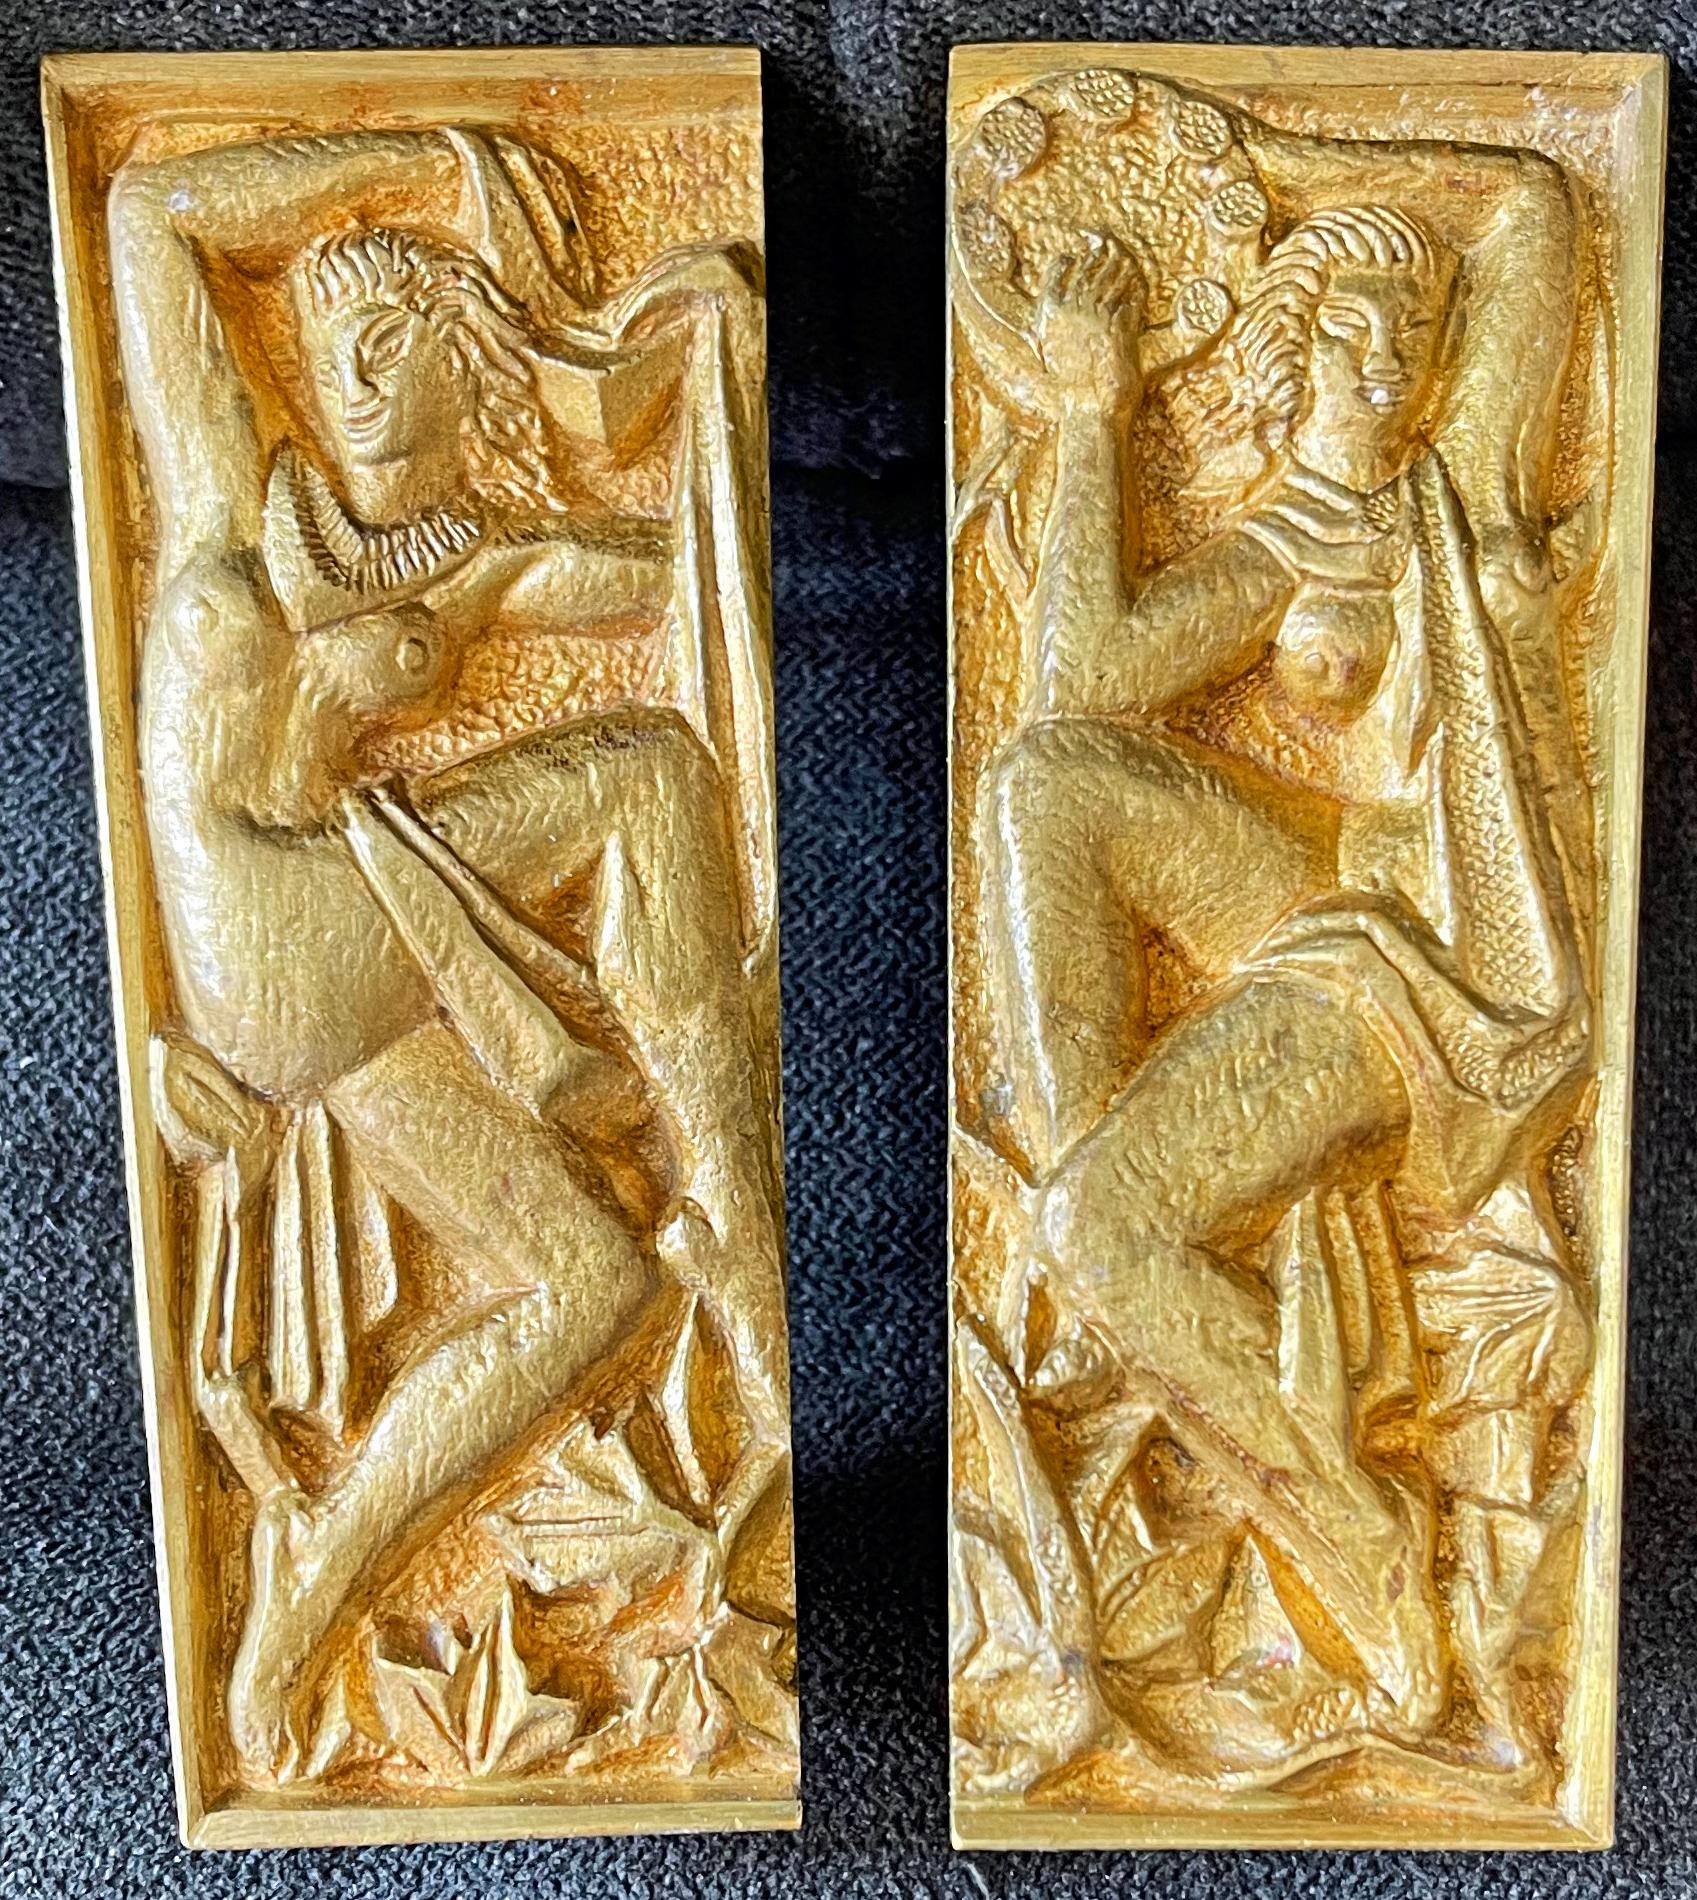 Fabulous and rare, this pair of gilded bronze door pulls depict two joyous nude female figures, one a dancer and the other playing the tambourine. Although the sculptor is not known, these represent the best of high-style Art Deco in 1920s France.